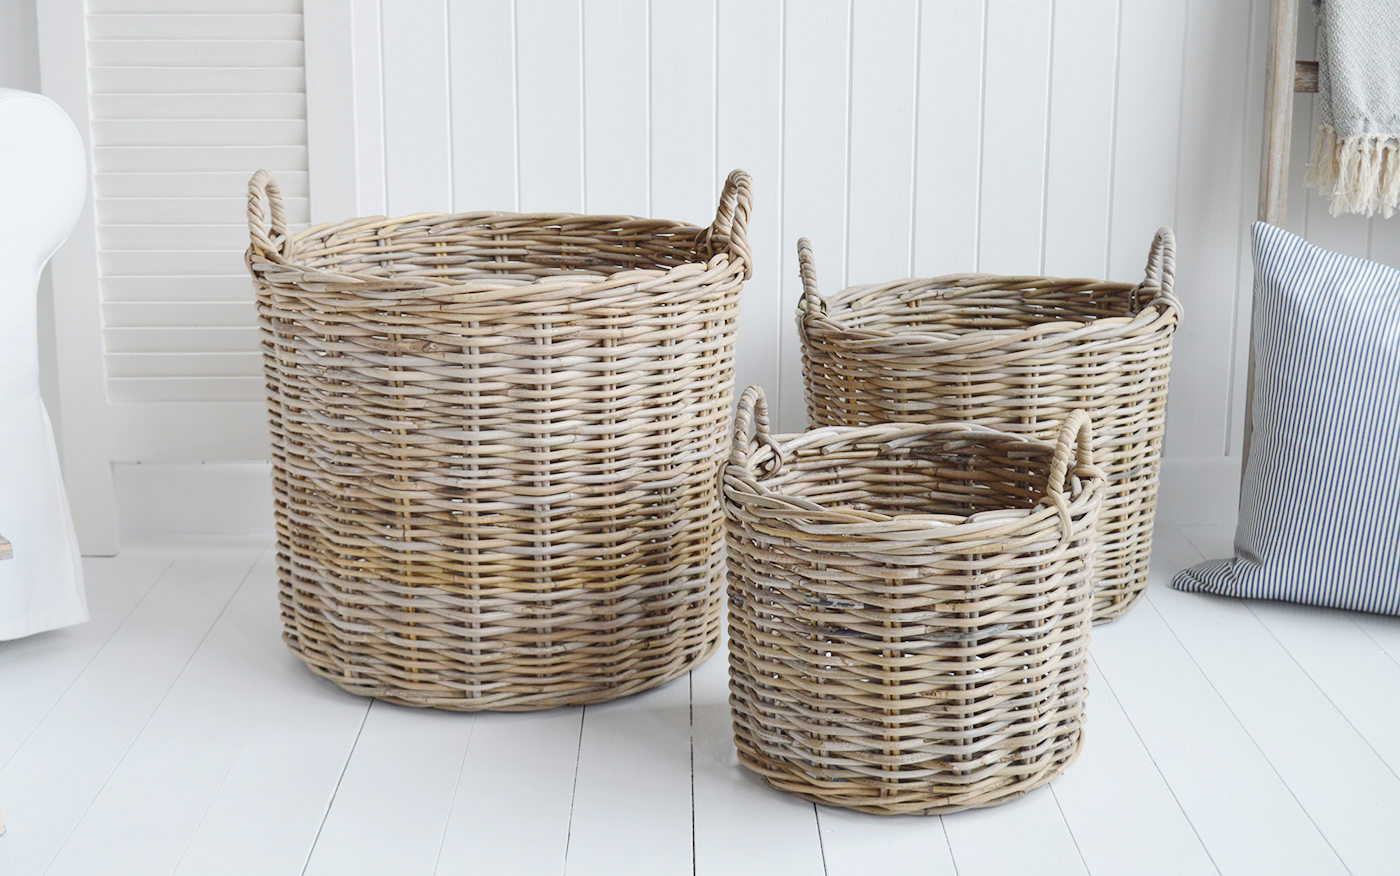 Casco Bay extra large Round basket with handles for logs, toys and everyday storage from The White Lighthouse Furniture and Home Interiors for New England, modern farmhouse country, coastal and city homes for hallway, living room, bedroom and bathroom